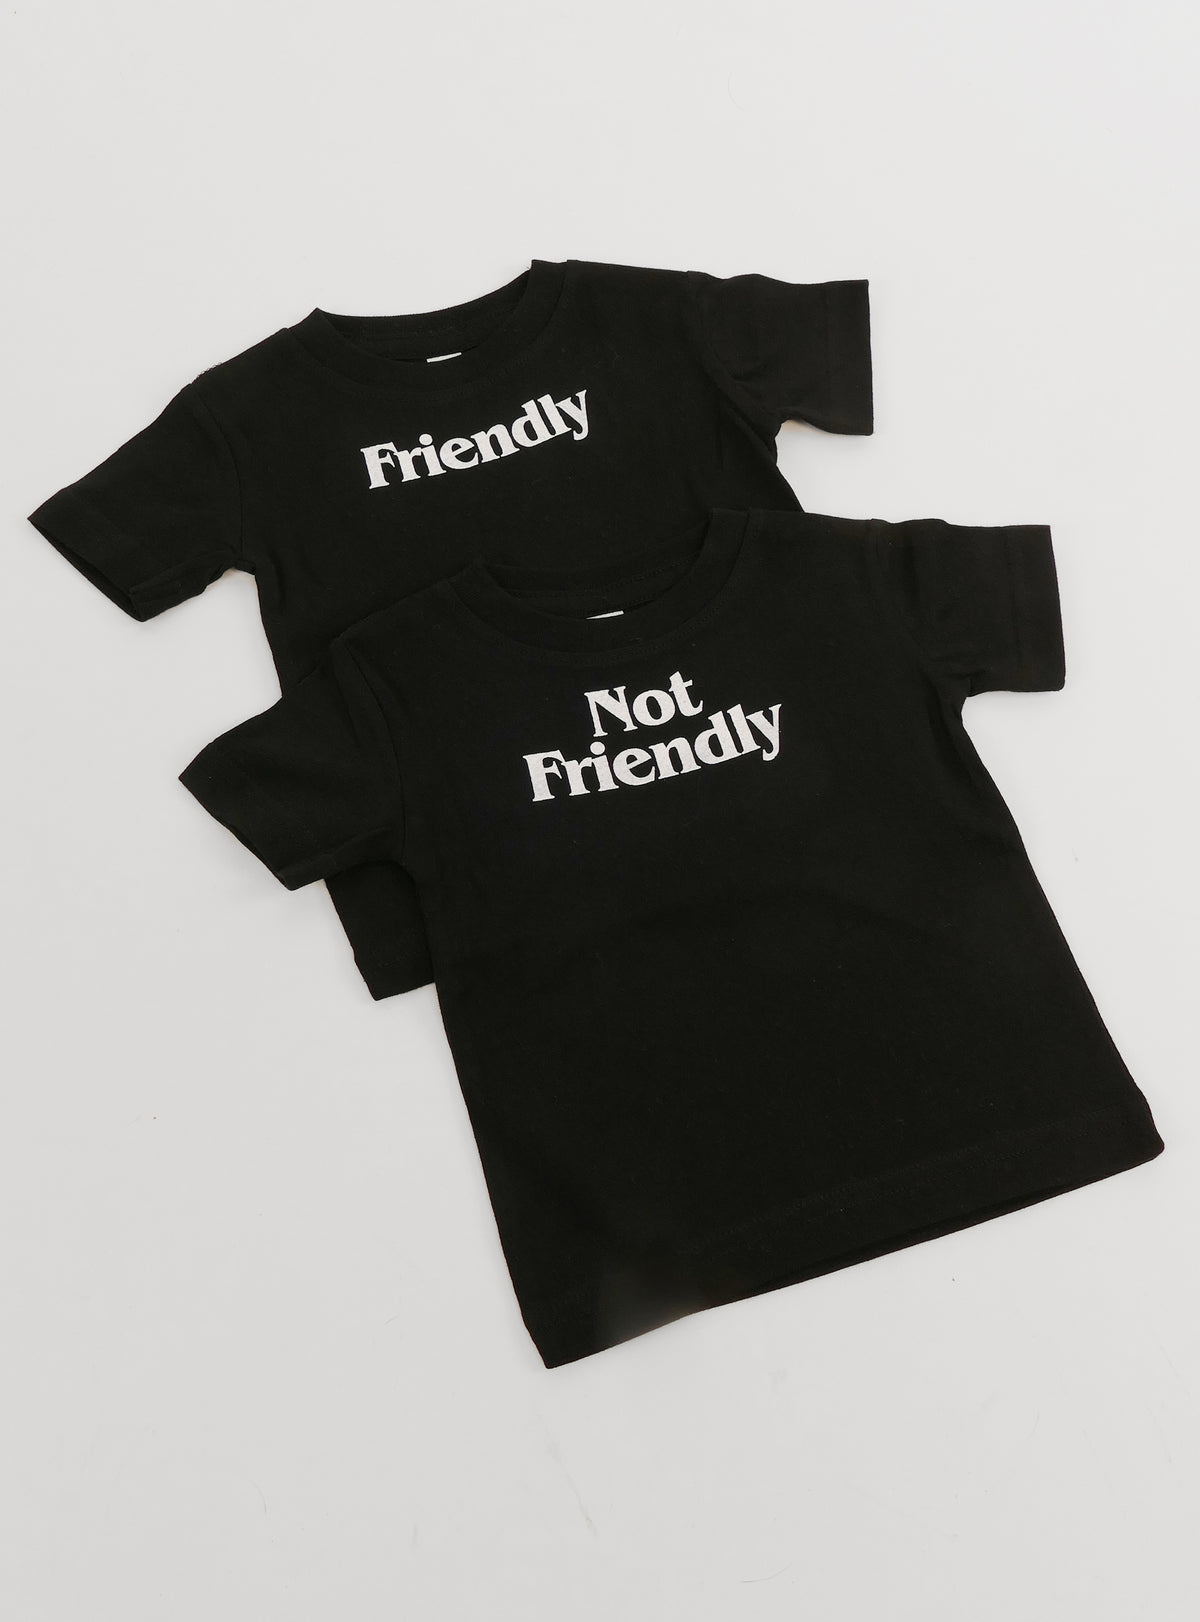 Friendly + Not Friendly (2-Pack) Dog Tee